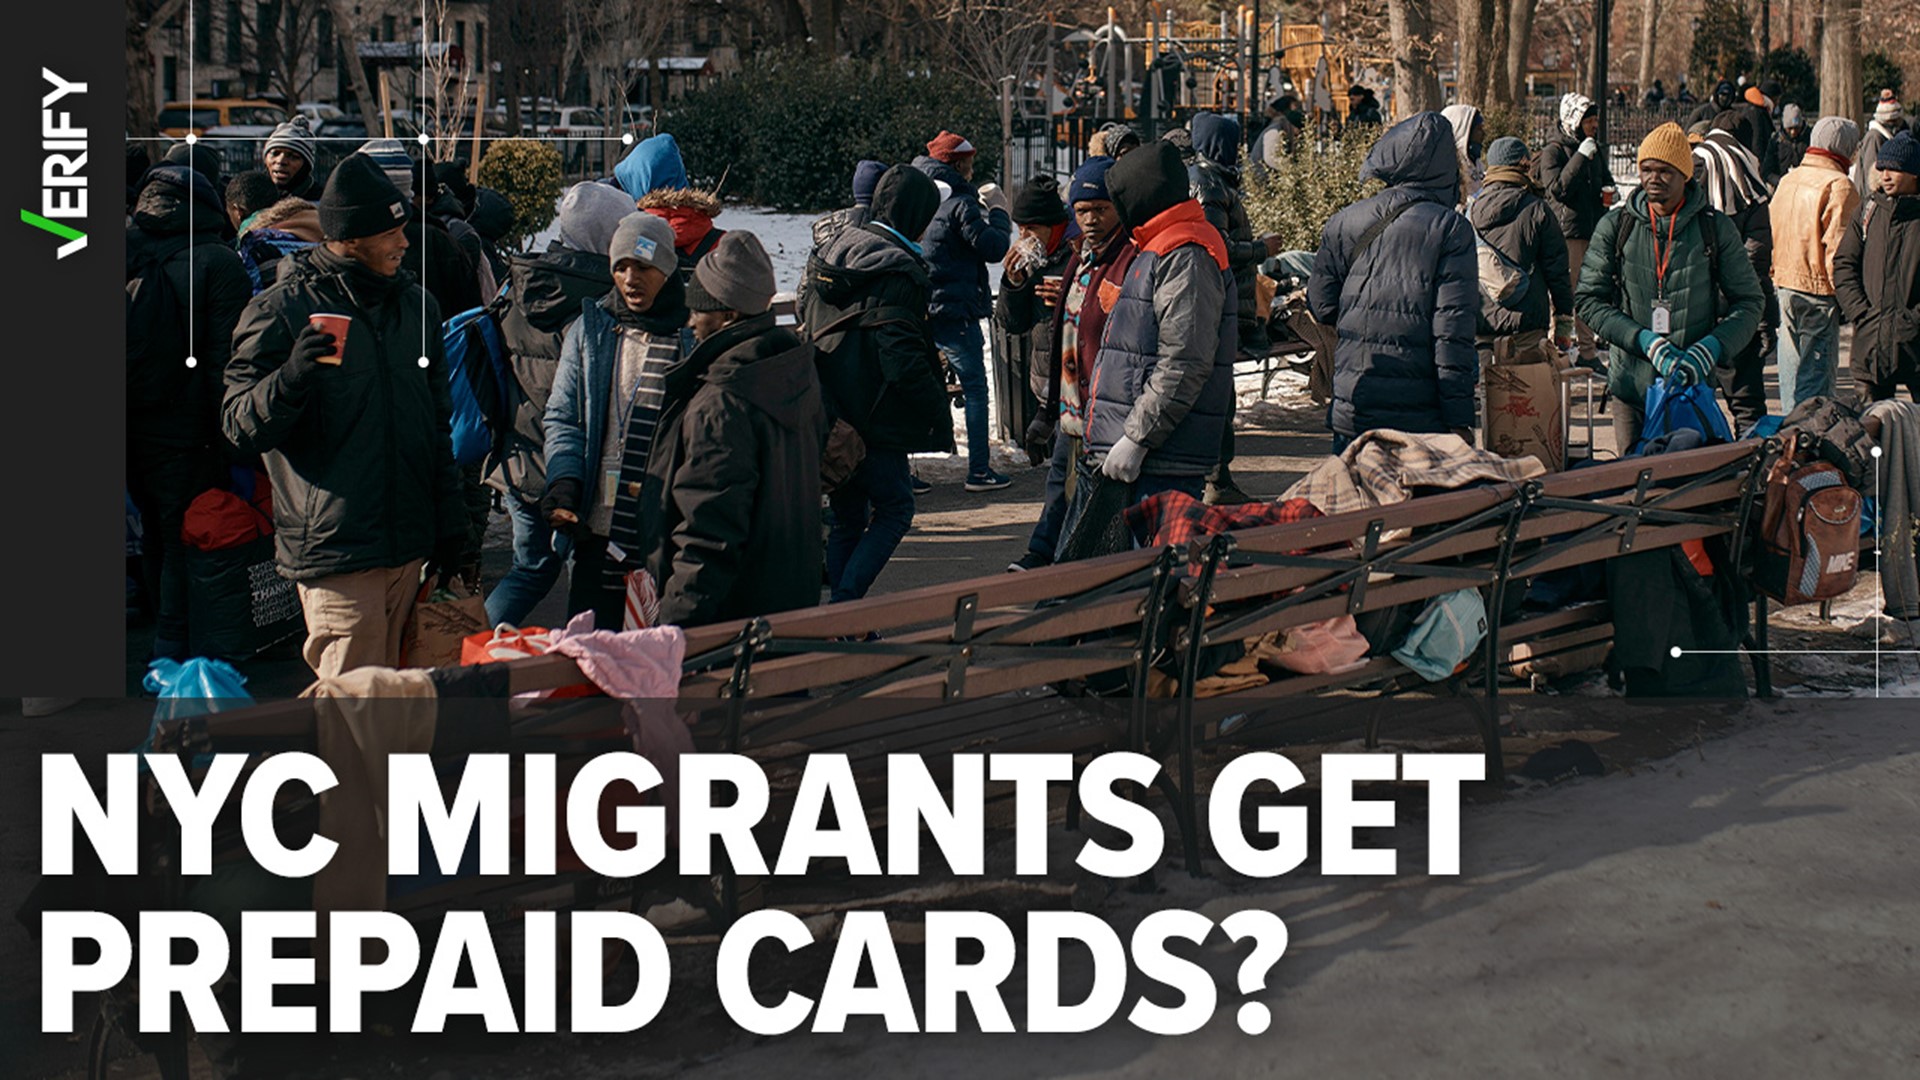 New York City is launching a pilot program that will give some migrants prepaid cards that can only be used to buy food and baby supplies.